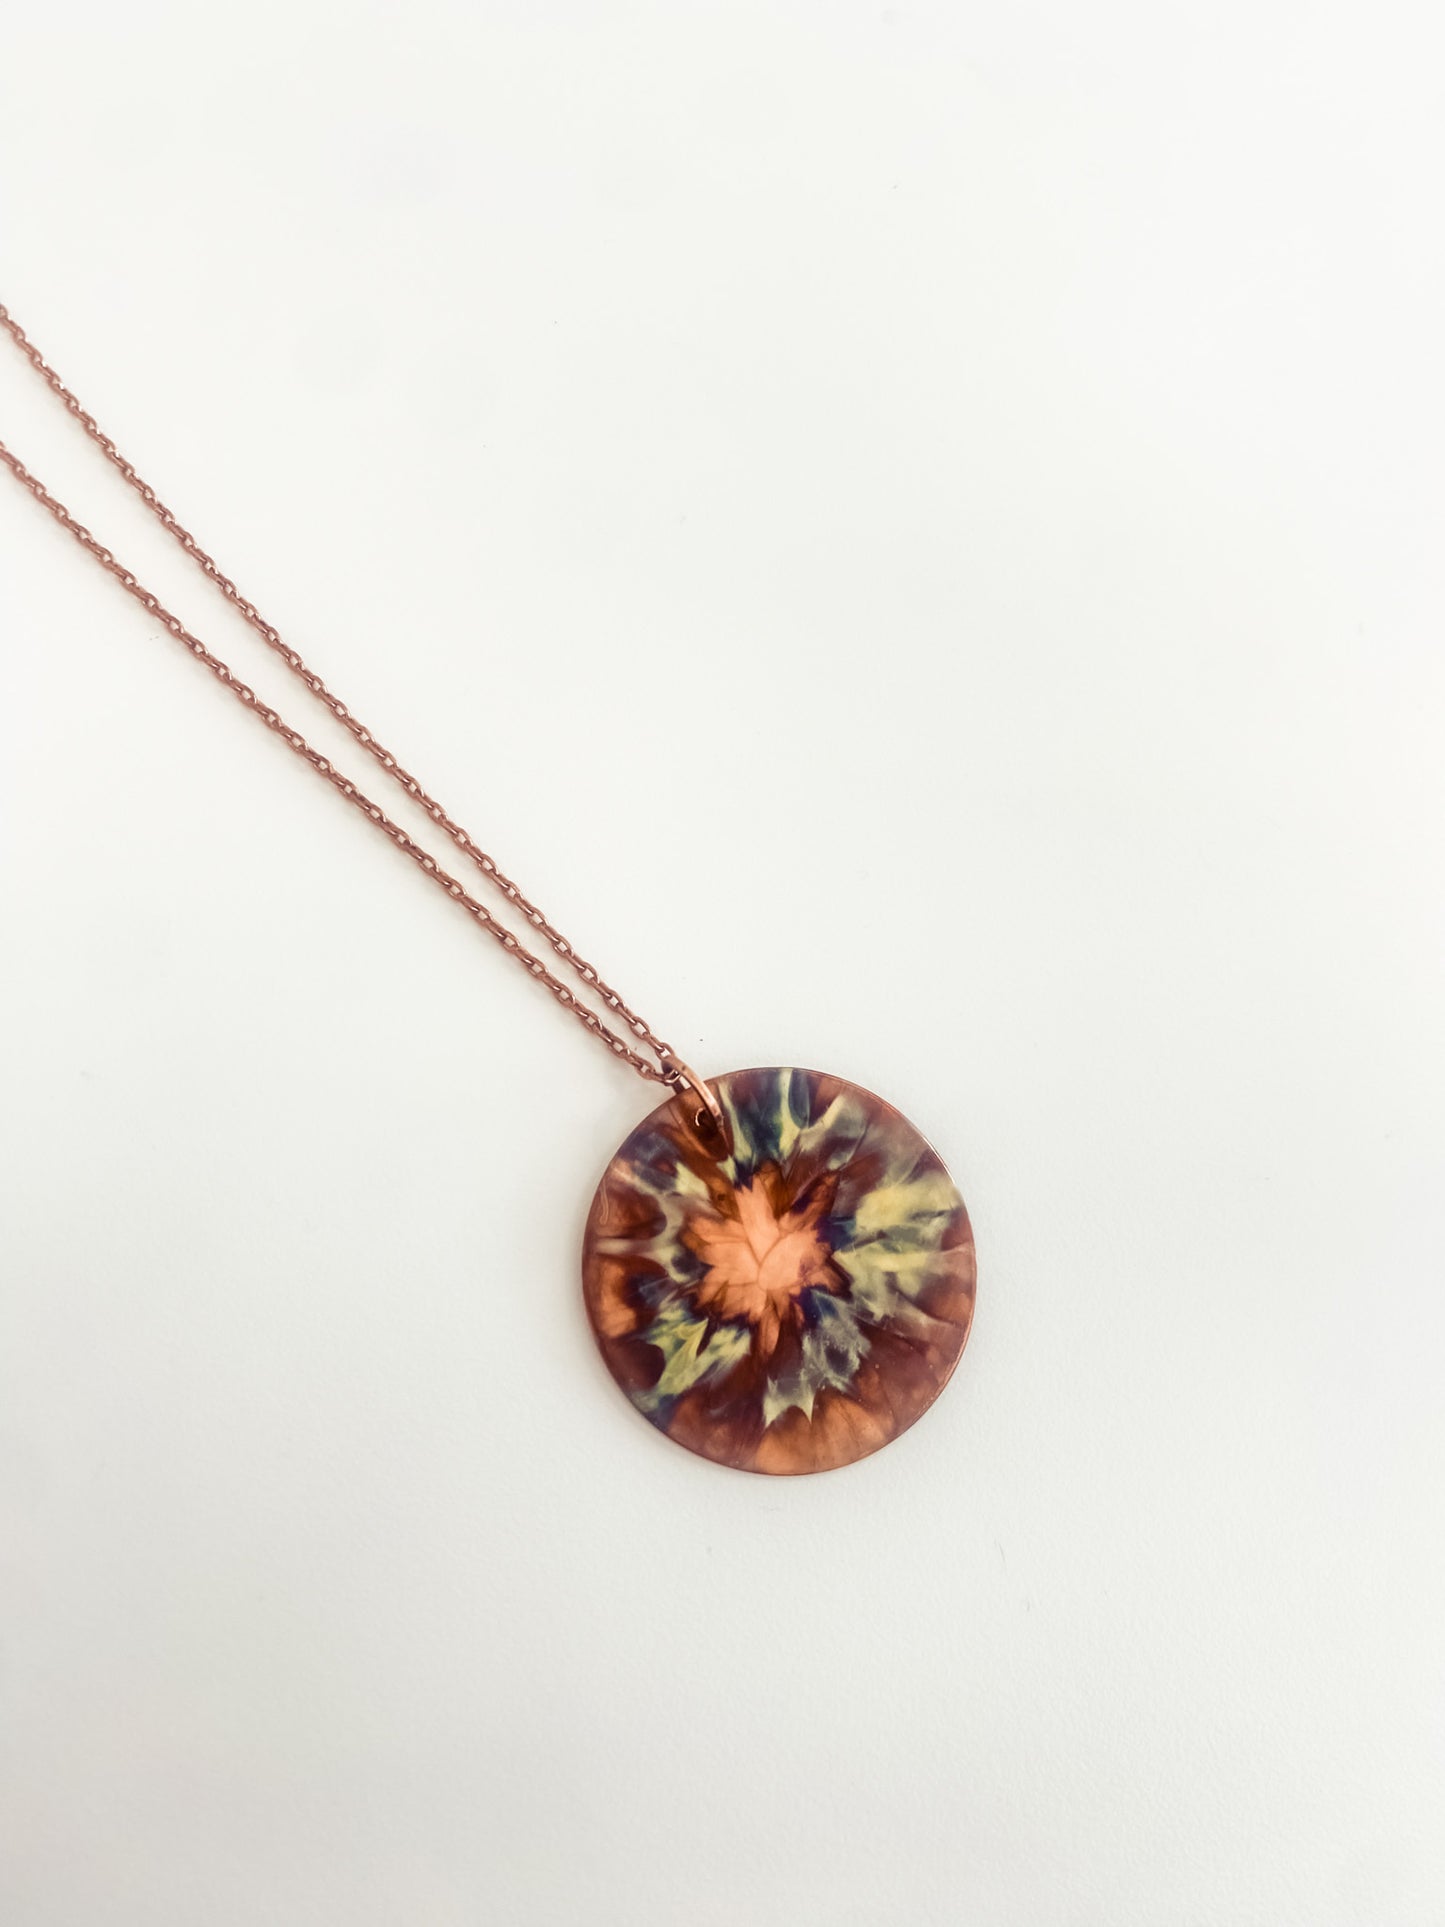 Fire painted Necklace